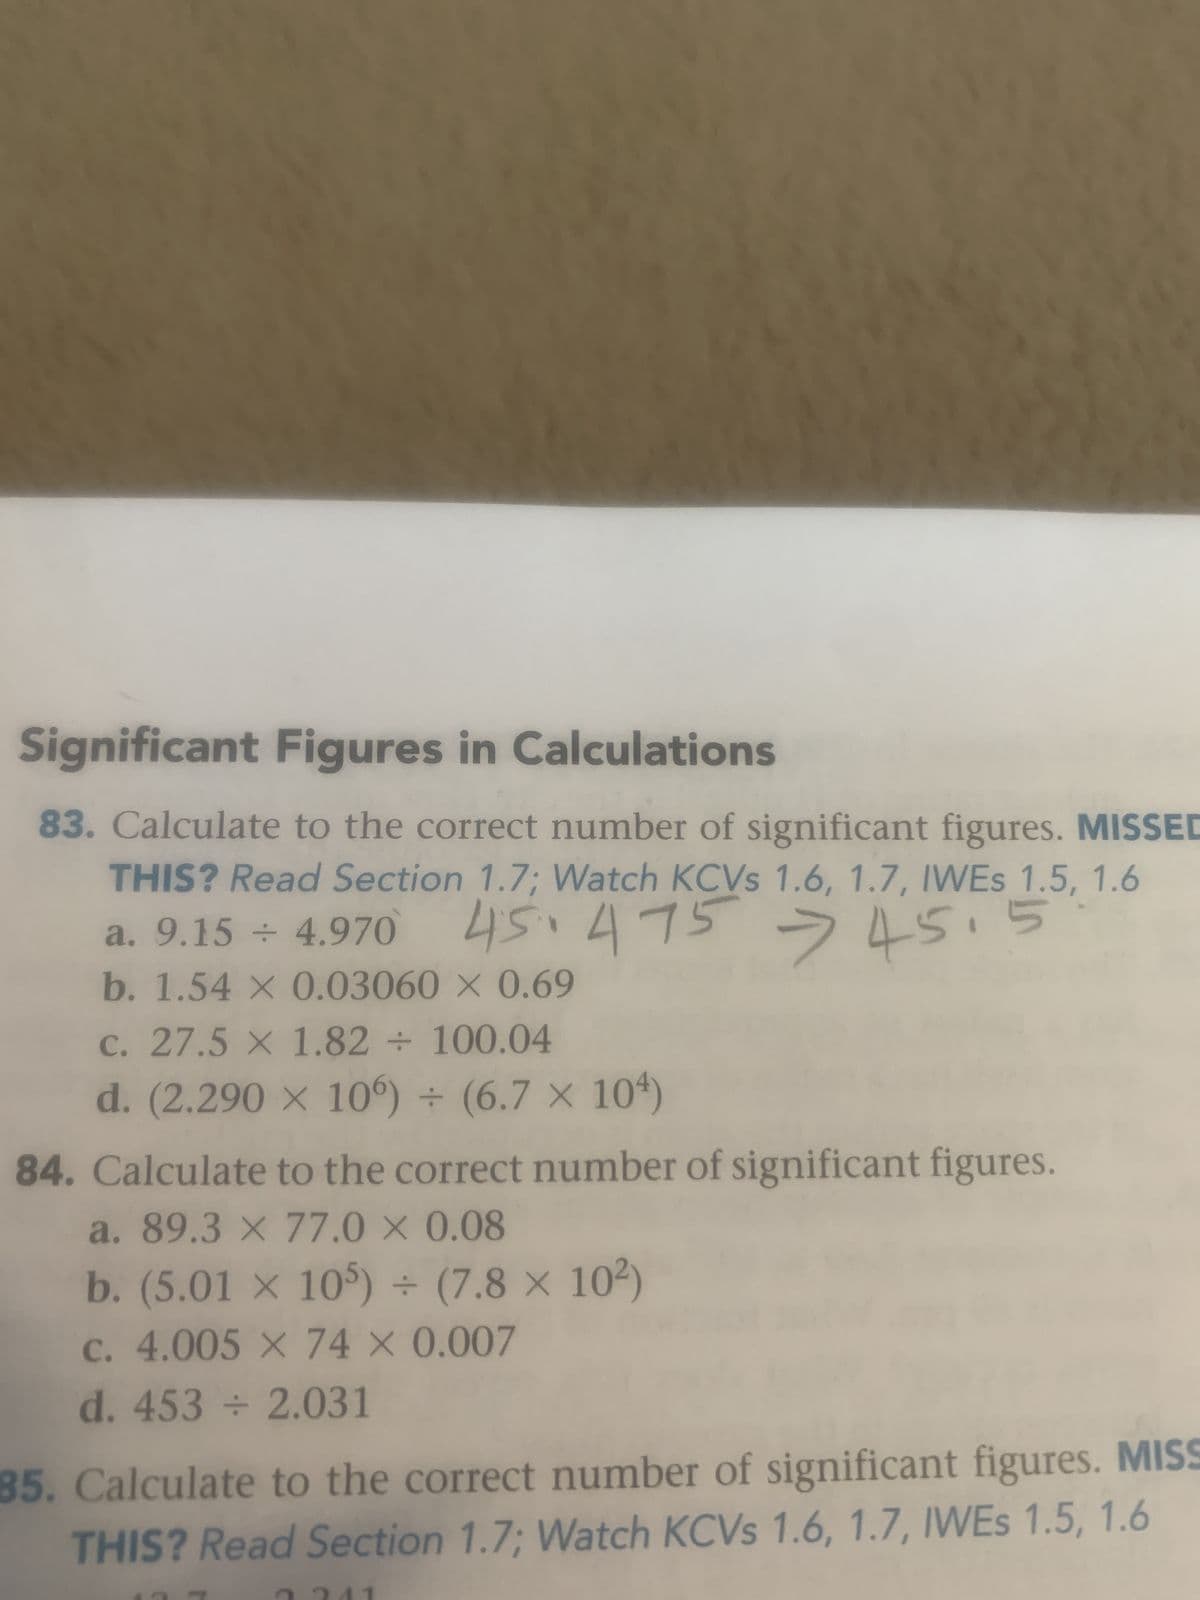 Significant Figures in Calculations
83. Calculate to the correct number of significant figures. MISSED
THIS? Read Section 1.7; Watch KCVs 1.6, 1.7, IWES 1.5, 1.6
a. 9.15 ÷ 4.970
45.475 - 45.5
b. 1.54 x 0.03060 x 0.69
c. 27.5 x 1.82 ÷ 100.04
d. (2.290 x 106) + (6.7 x 104)
84. Calculate to the correct number of significant figures.
a. 89.3 x 77.0 × 0.08
b. (5.01 x 105) ÷ (7.8 x 10²)
c. 4.005 x 74 × 0.007
d. 453 ÷ 2.031
85. Calculate to the correct number of significant figures. MISS
THIS? Read Section 1.7; Watch KCVs 1.6, 1.7, IWEs 1.5, 1.6